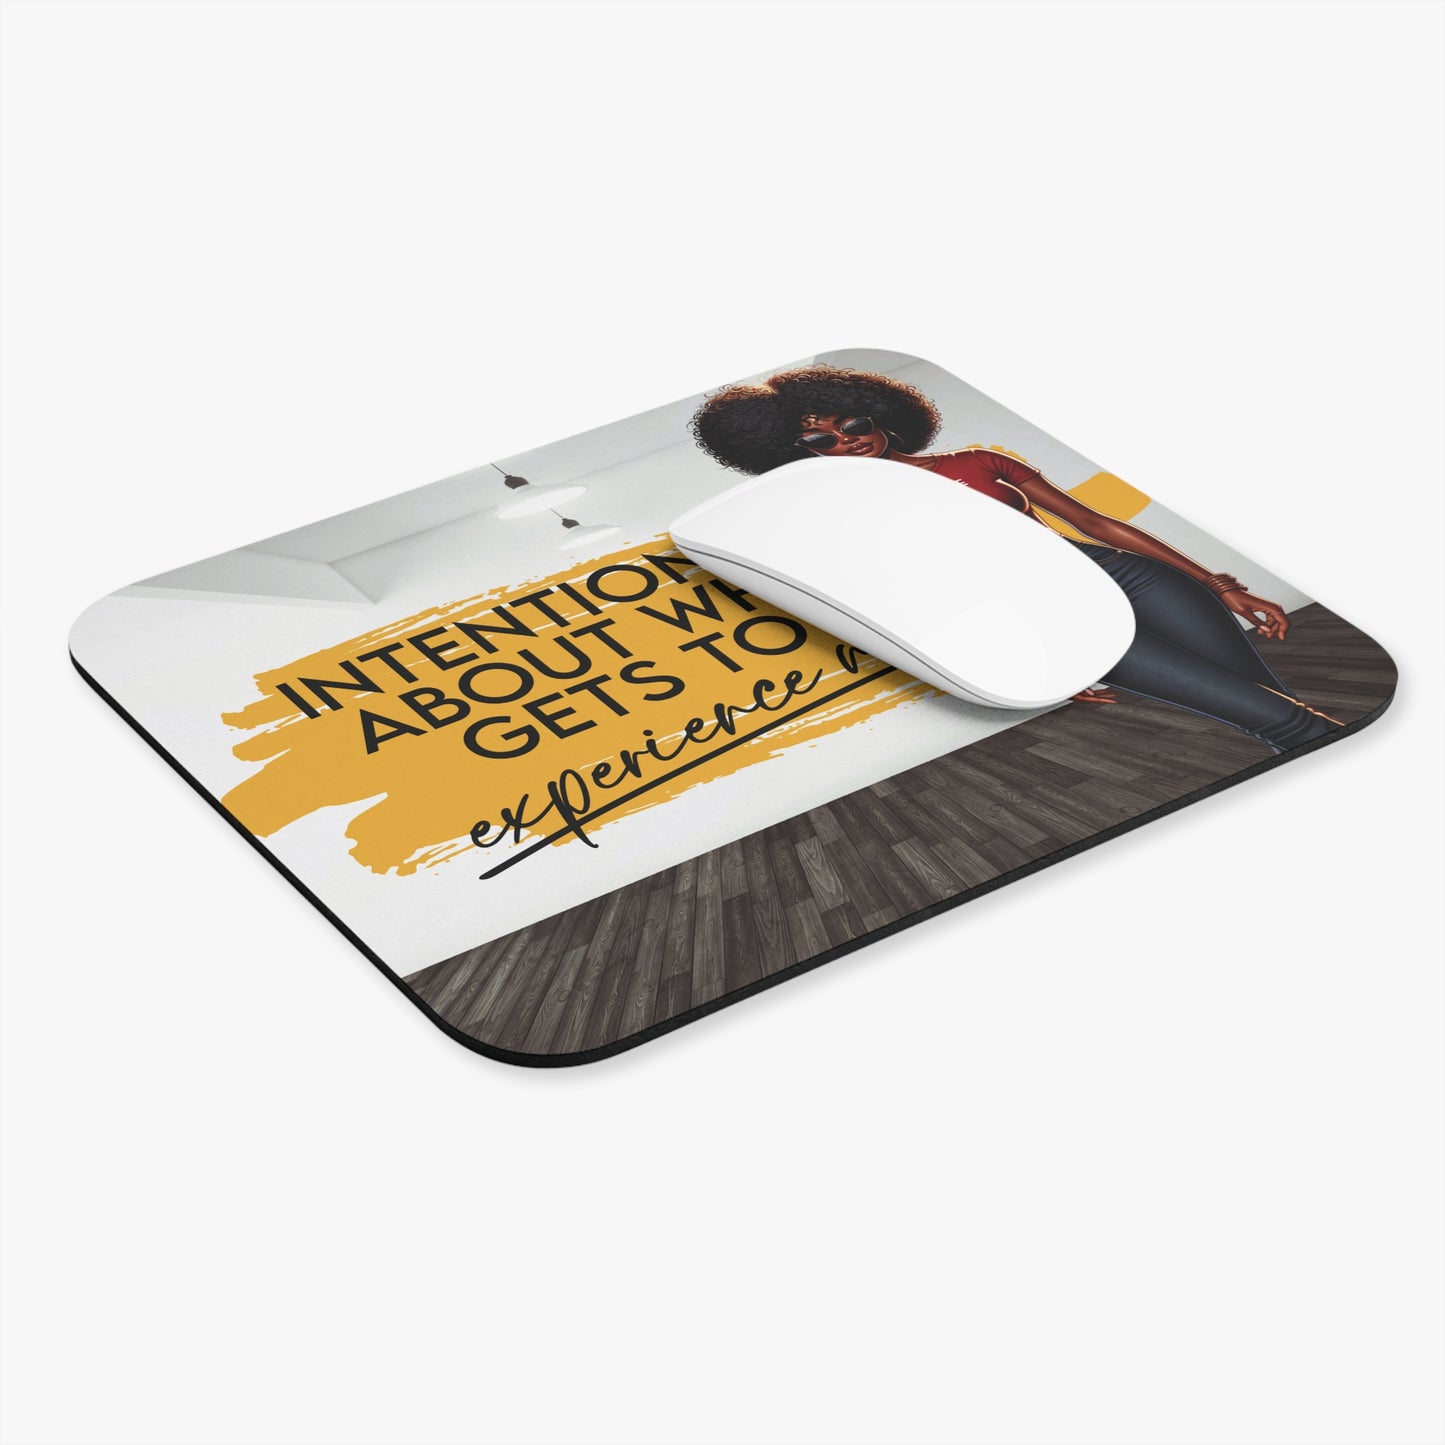 Intentional Experience Mouse Pad